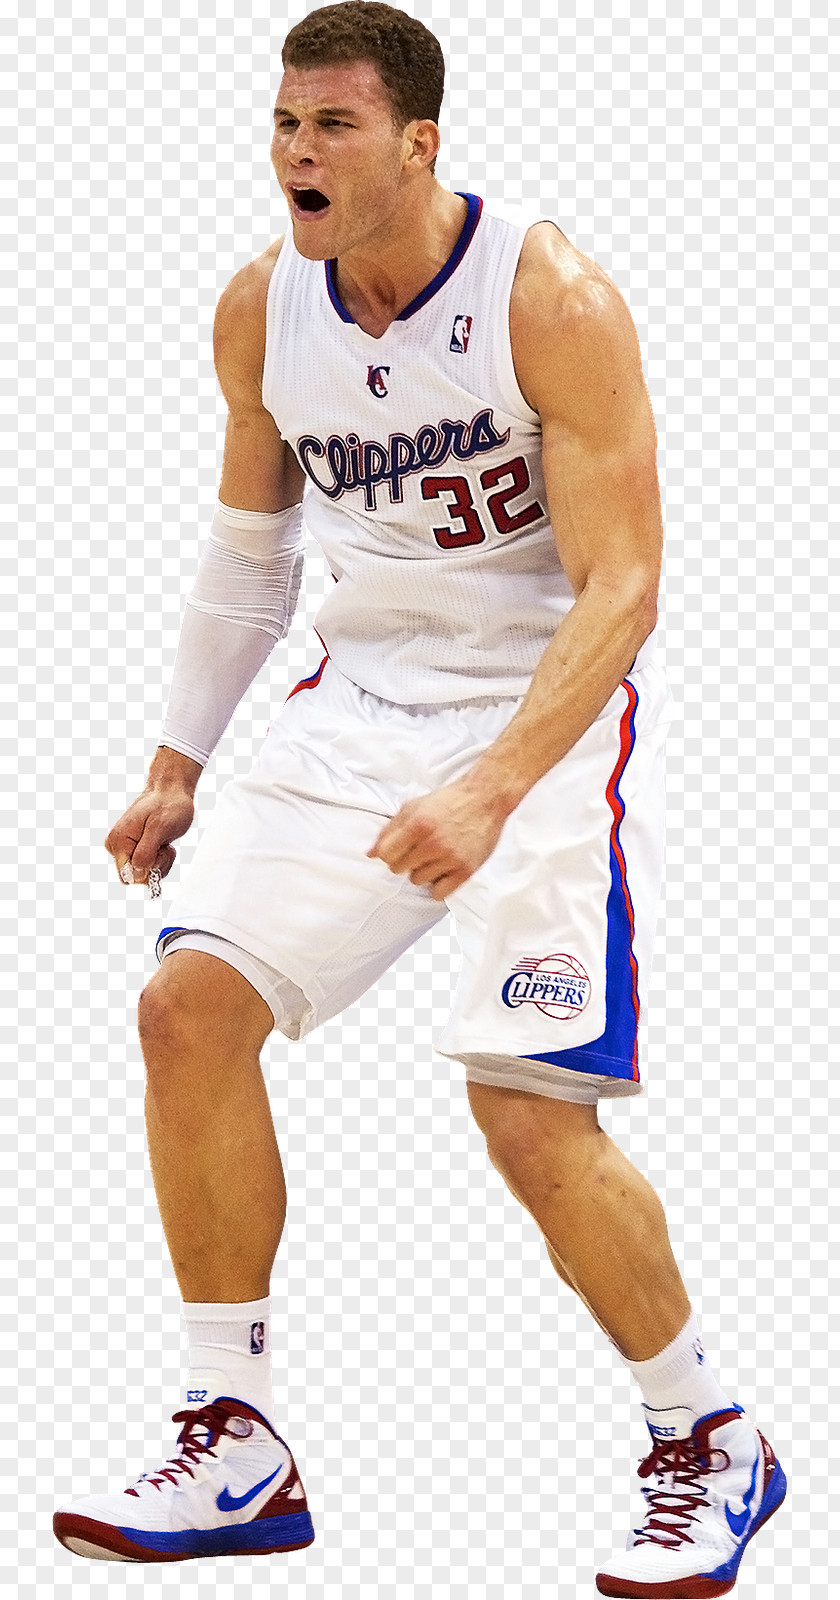 Griffin Blake Los Angeles Clippers Basketball Player Athlete PNG